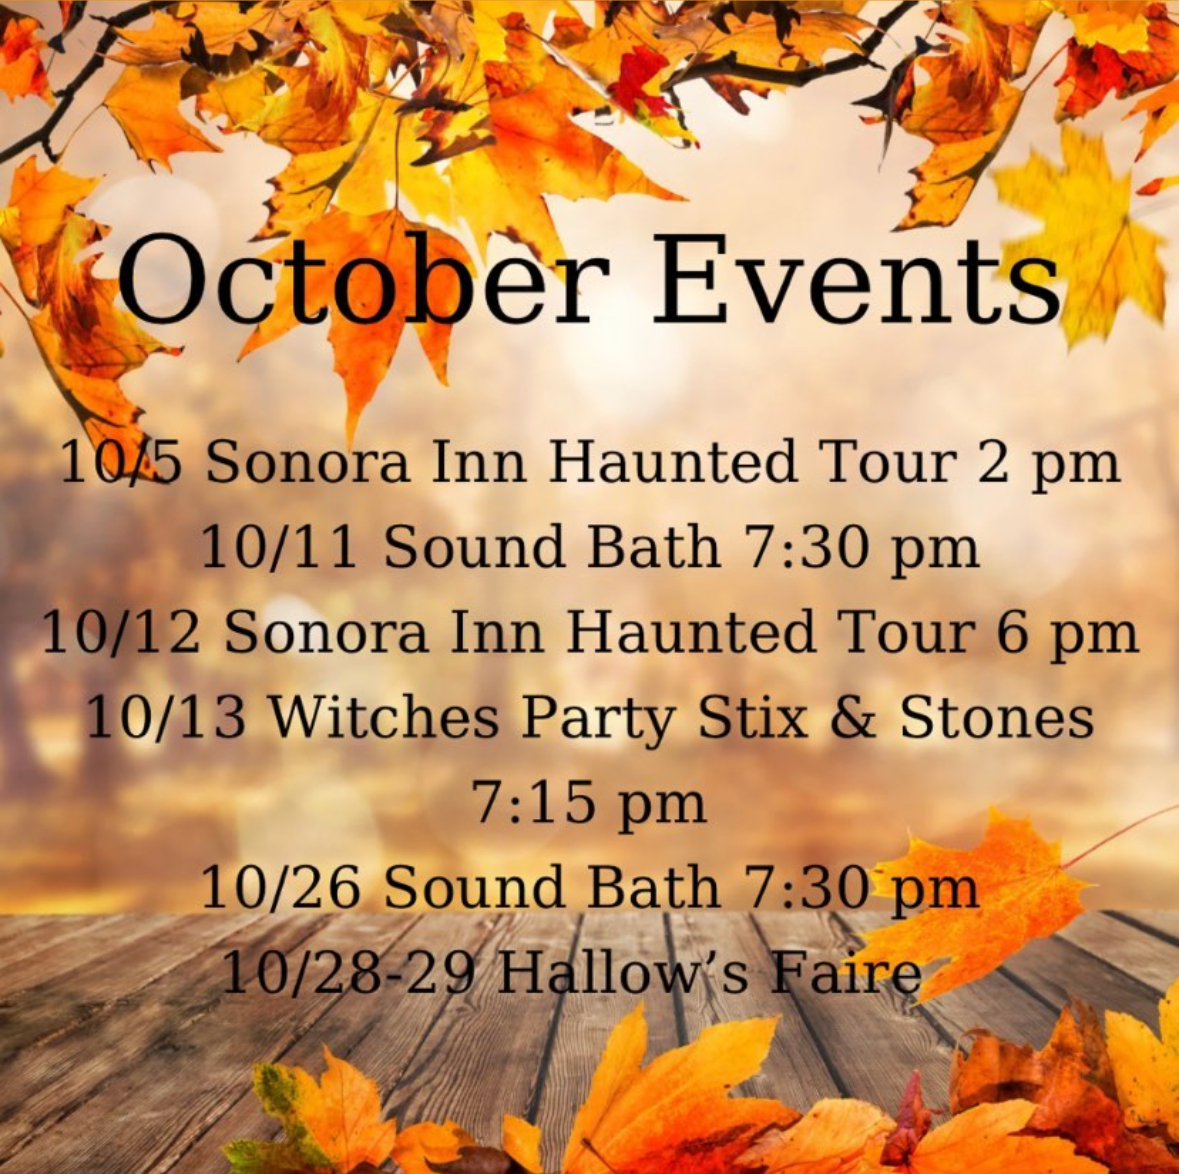 There are many upcoming events to attend locally, so there will be no shortage of fun things to do for this Halloween season.